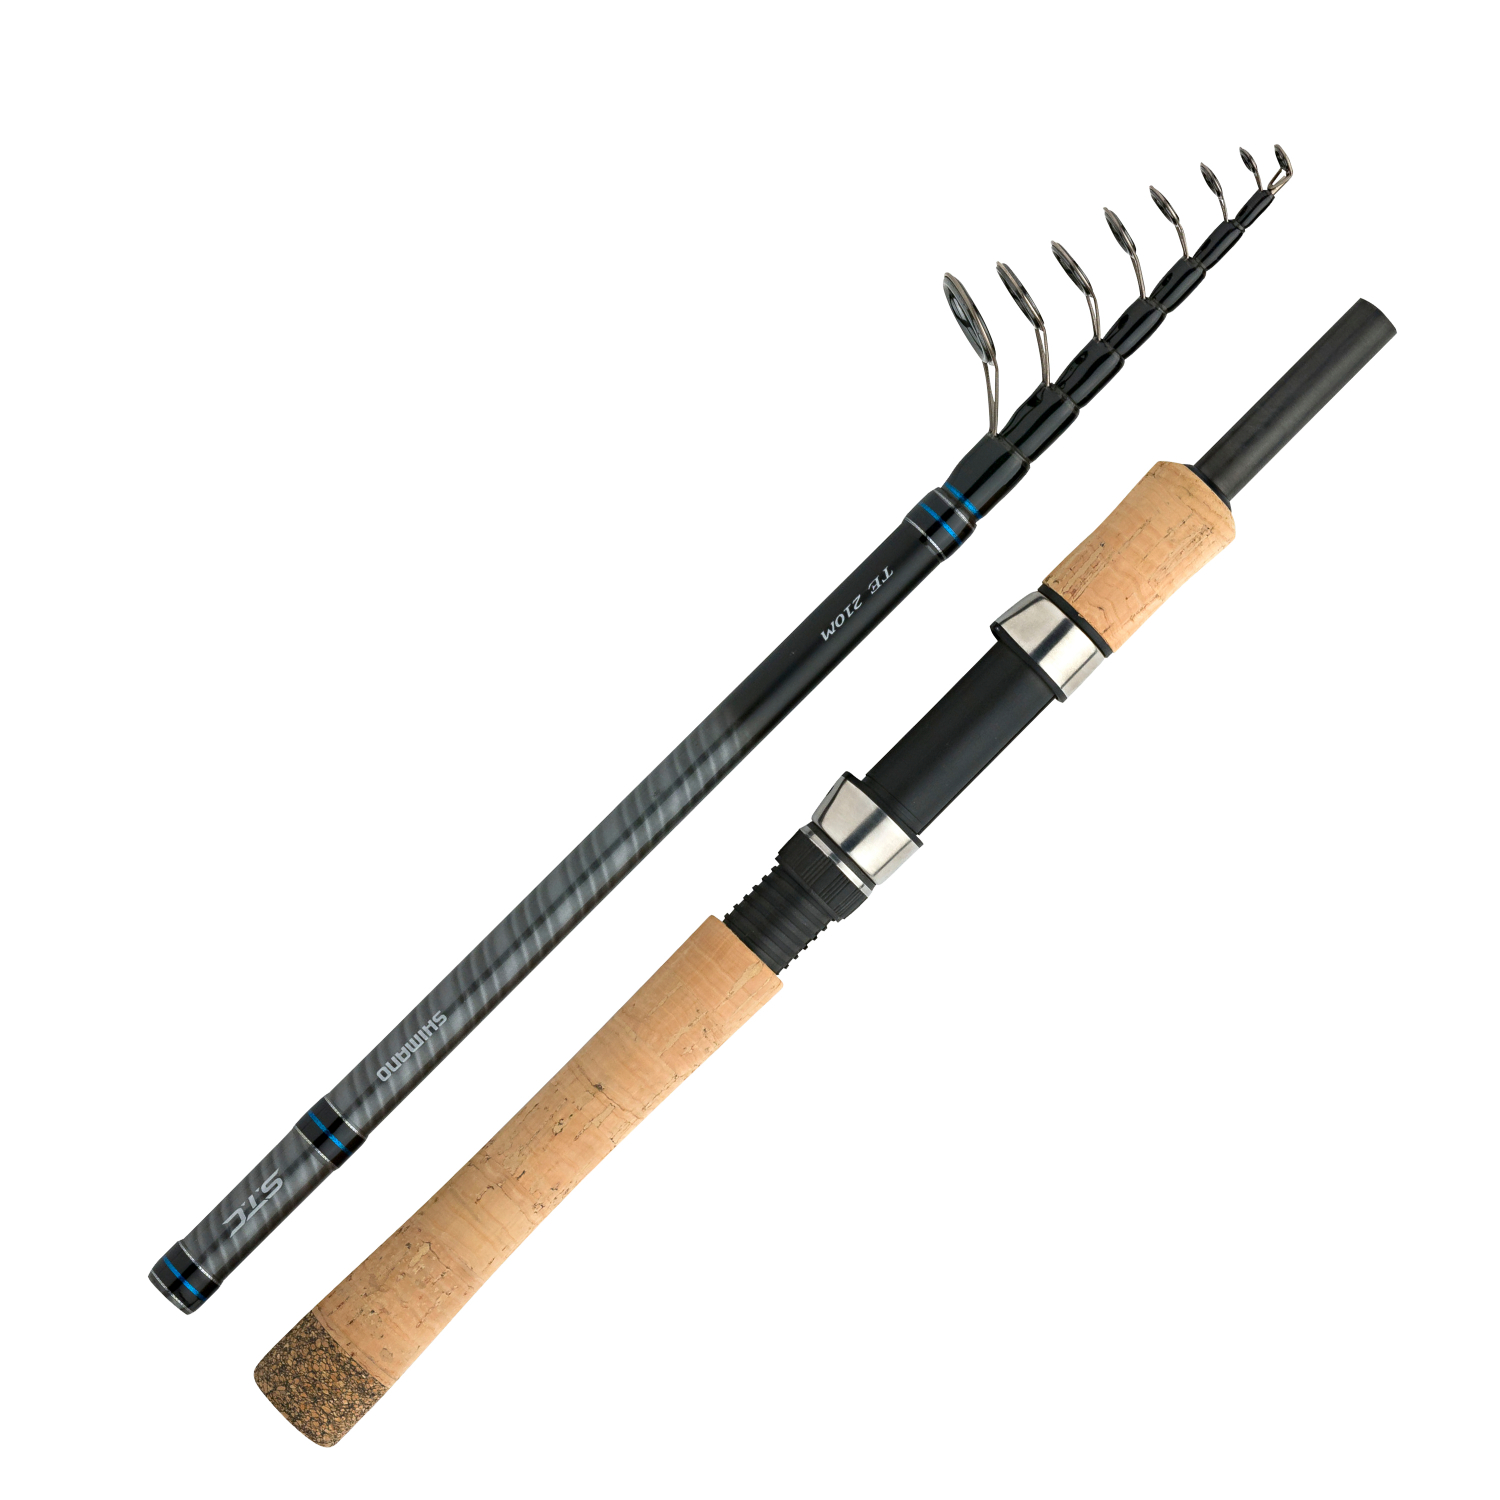 tele surf fishing rod, tele surf fishing rod Suppliers and Manufacturers at